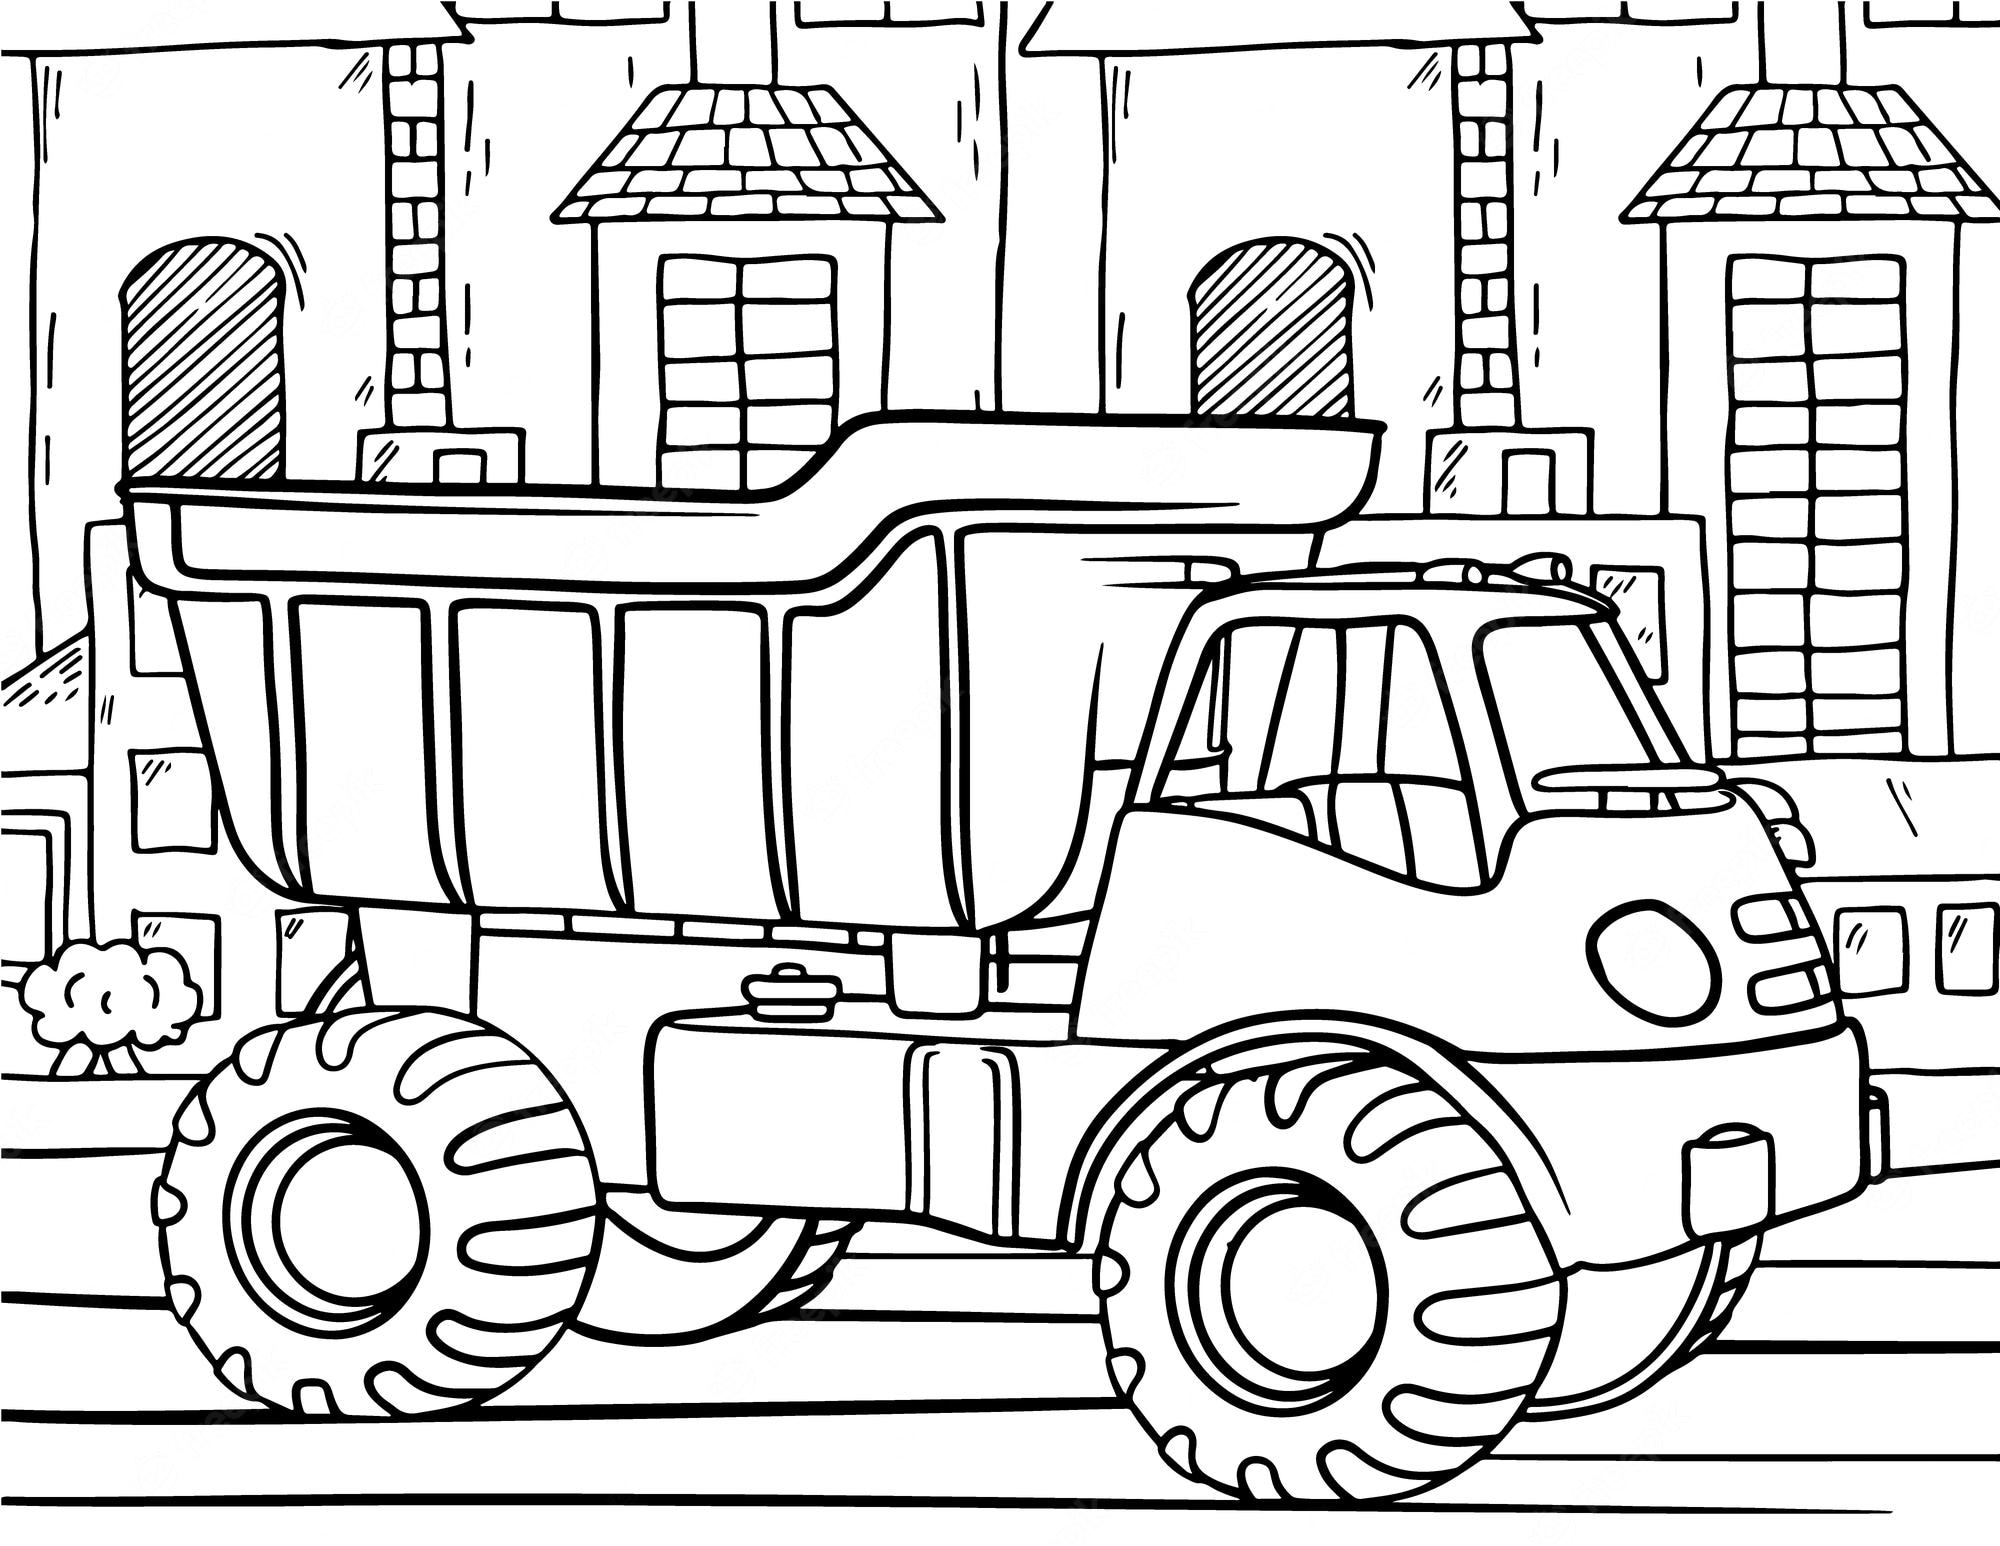 Premium Vector | Dump truck coloring page for kids vehicle